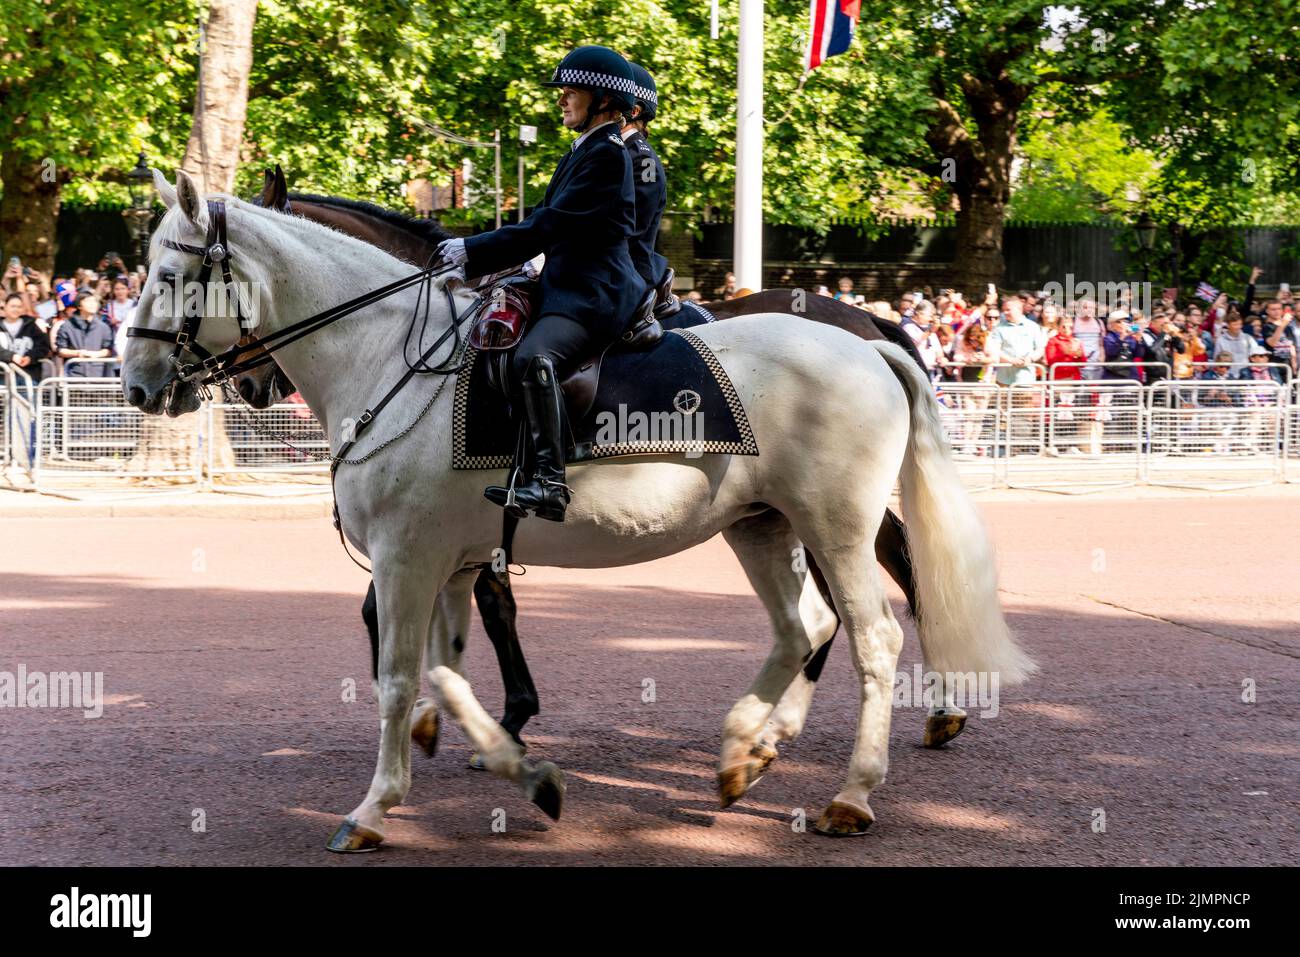 Two Mounted Female Police Officers In The Mall During The Queen's Platinum Jubilee Celebrations, The Mall, London, UK. Stock Photo